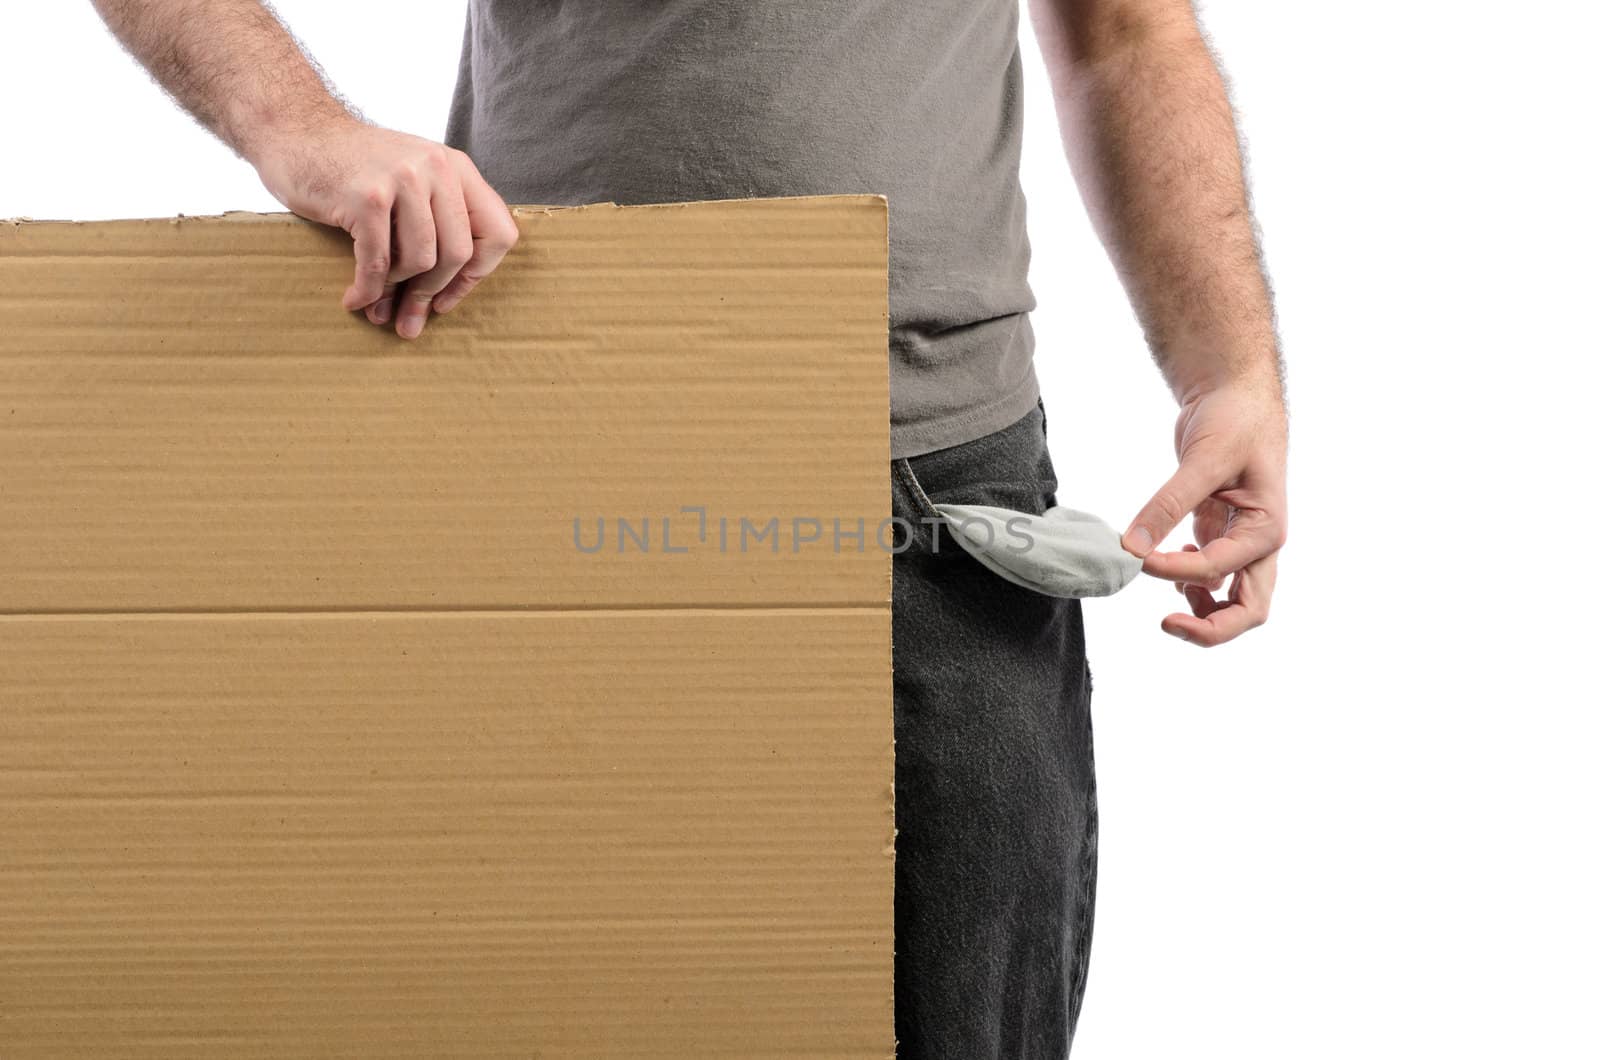 A moneyless man holding a cardboard sign with his pocket emptied out.